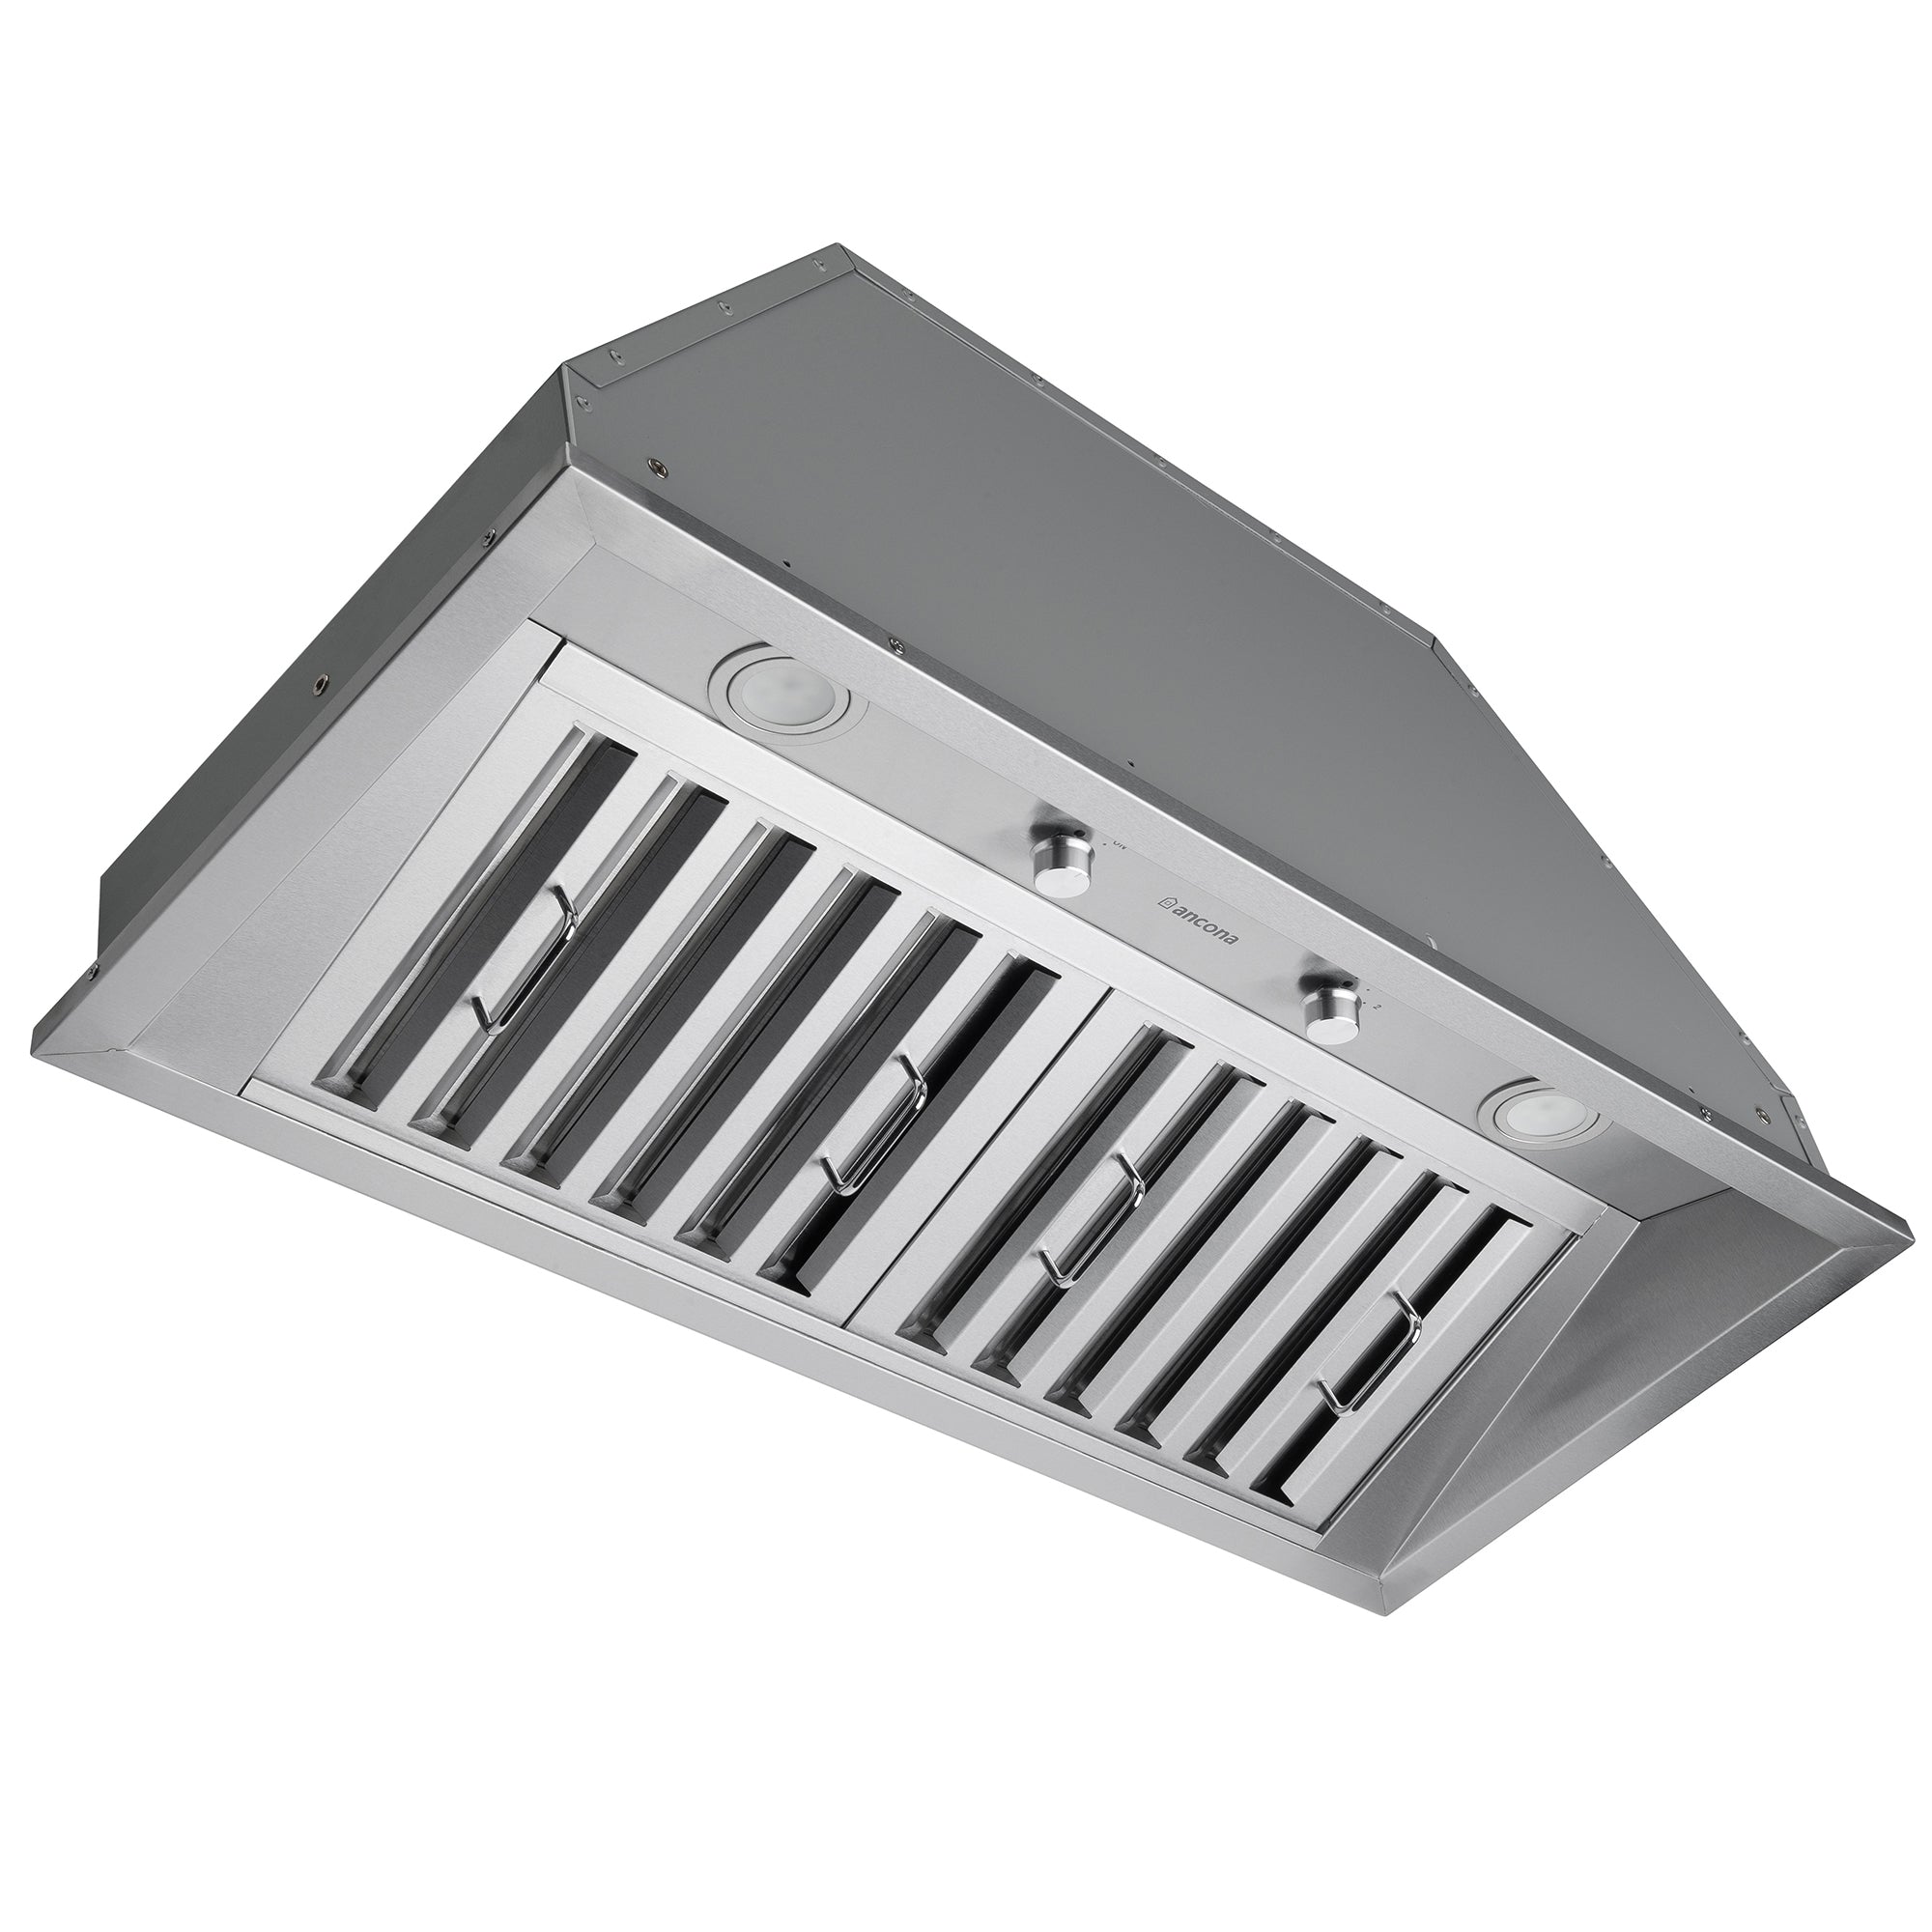 Ancona Pro 34″ 600 CFM Ducted Insert Range Hood in Stainless Steel - A